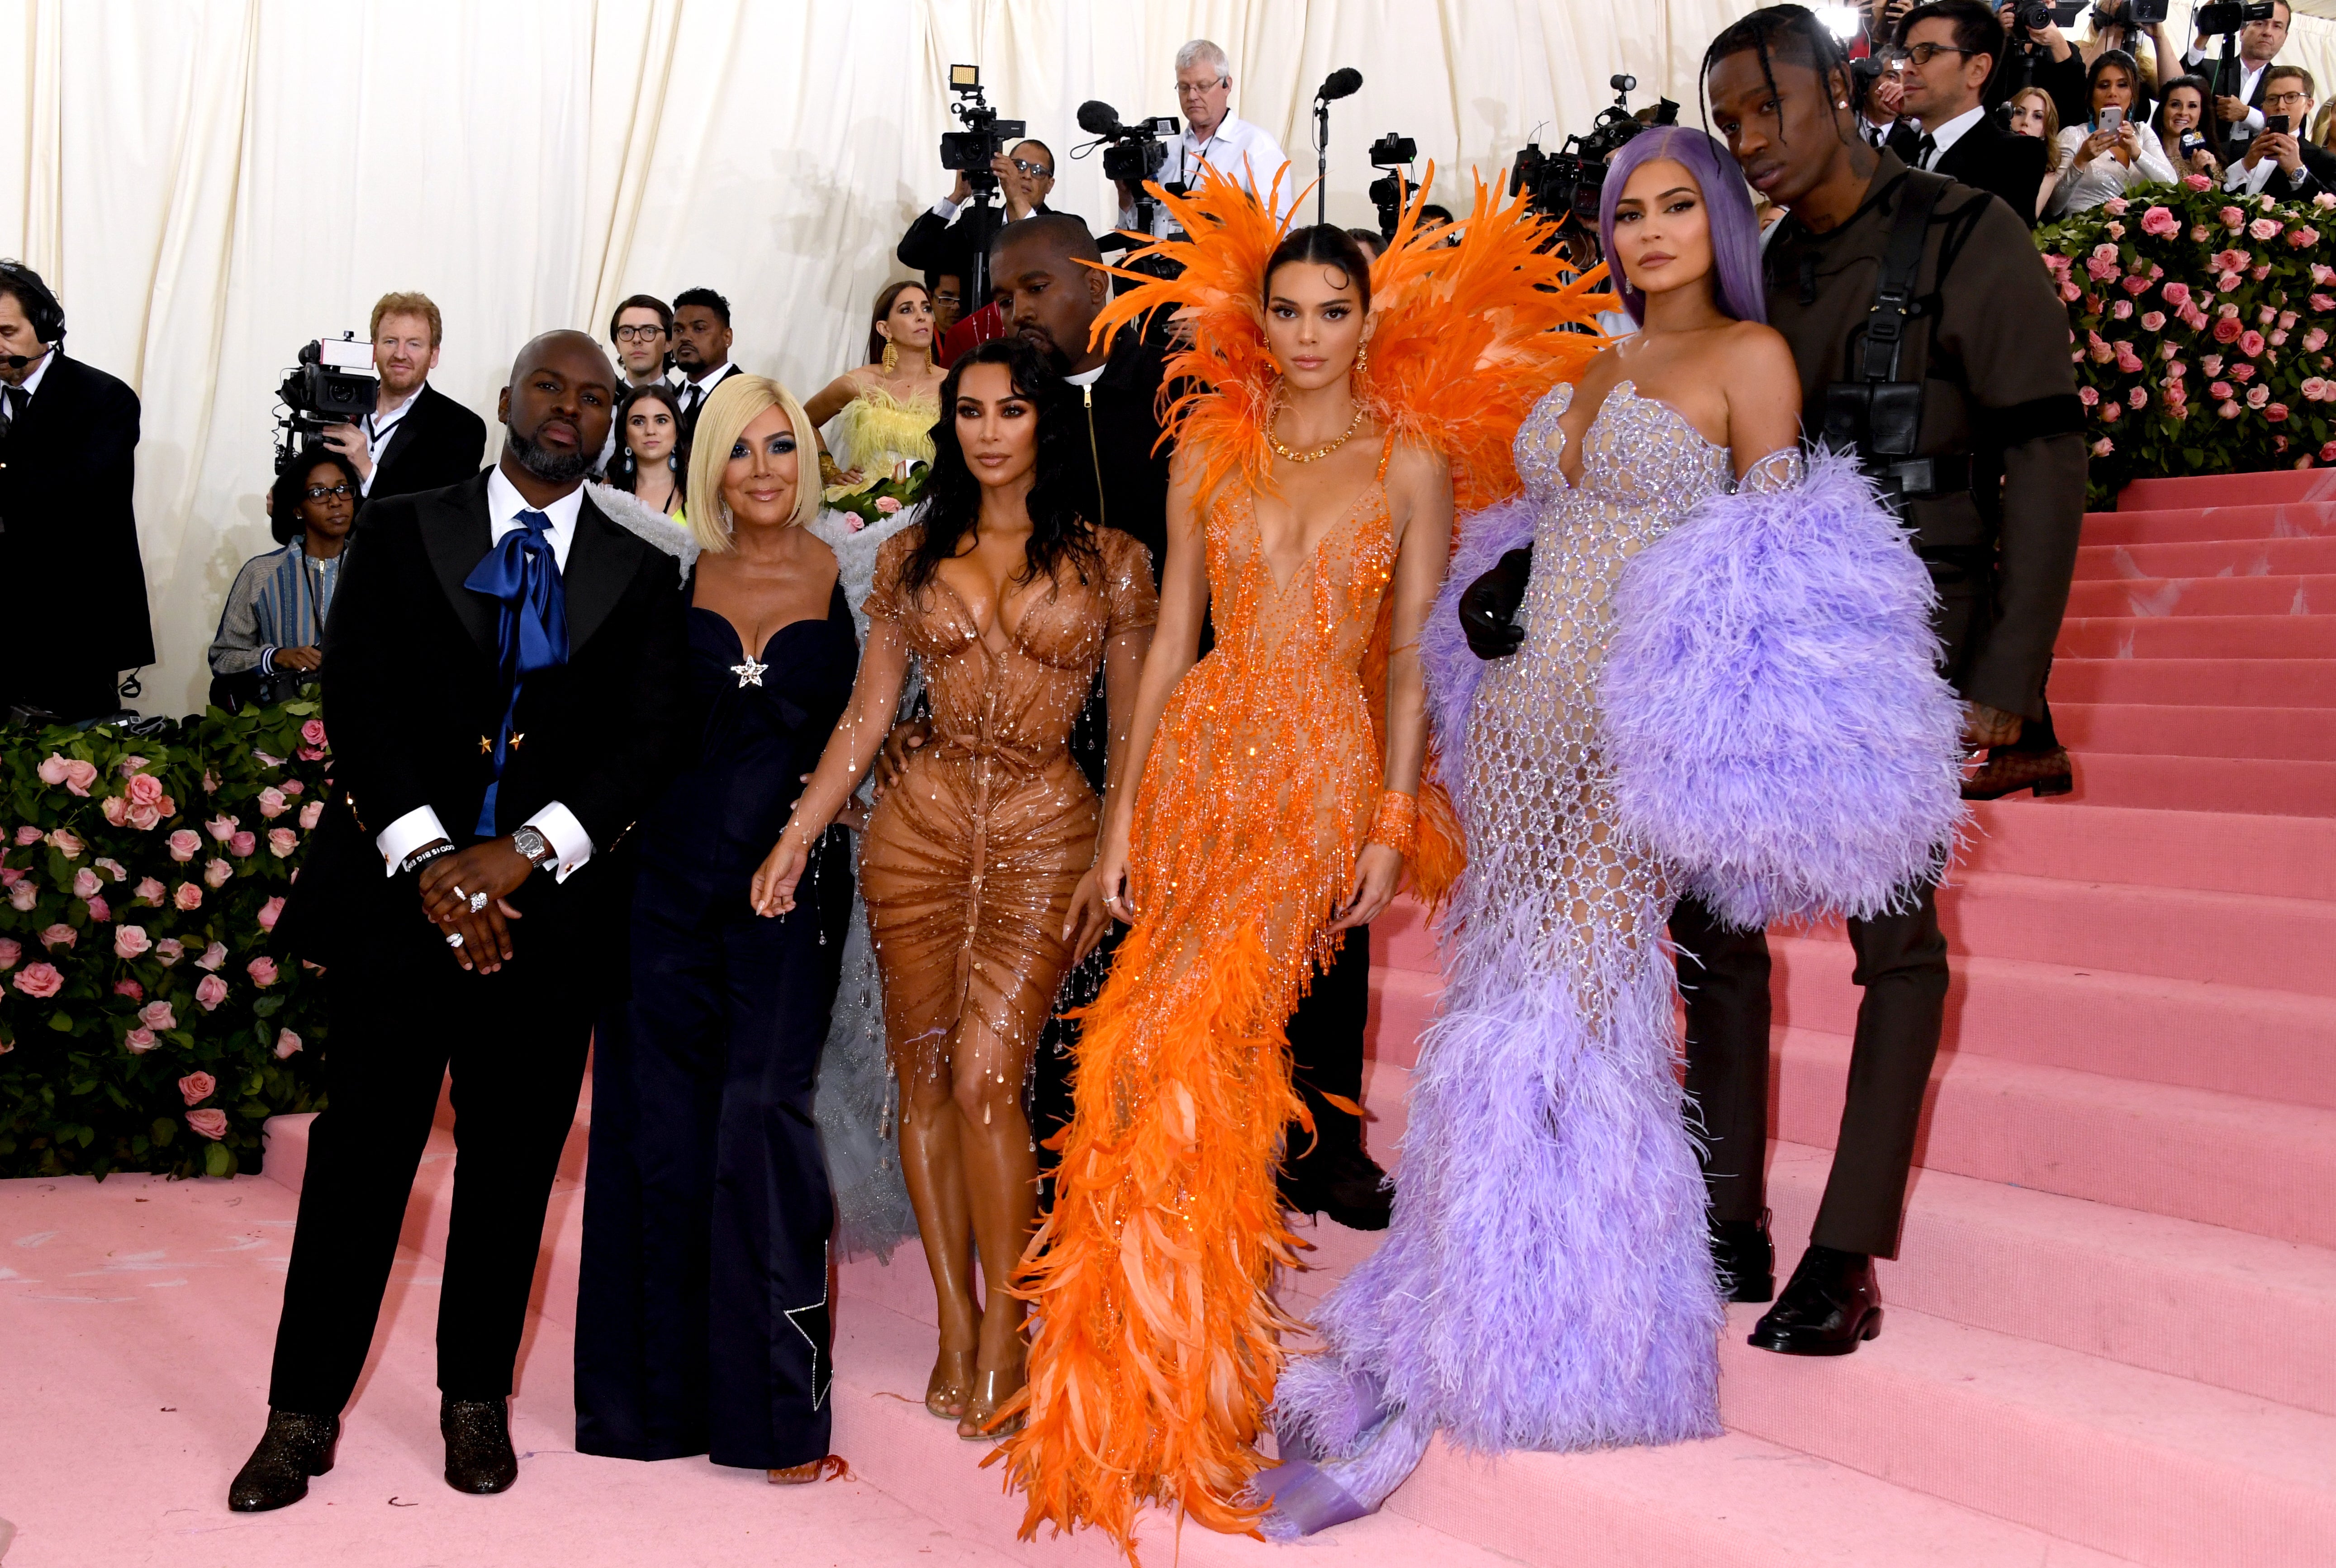 (Left to right) Corey Gamble, Kris Jenner, Kim Kardashian-West, Kanye West, Kendall Jenner, Kylie Jenner and Travis Scott attending the Metropolitan Museum of Art Costume Institute Benefit Gala 2019 in New York, USA